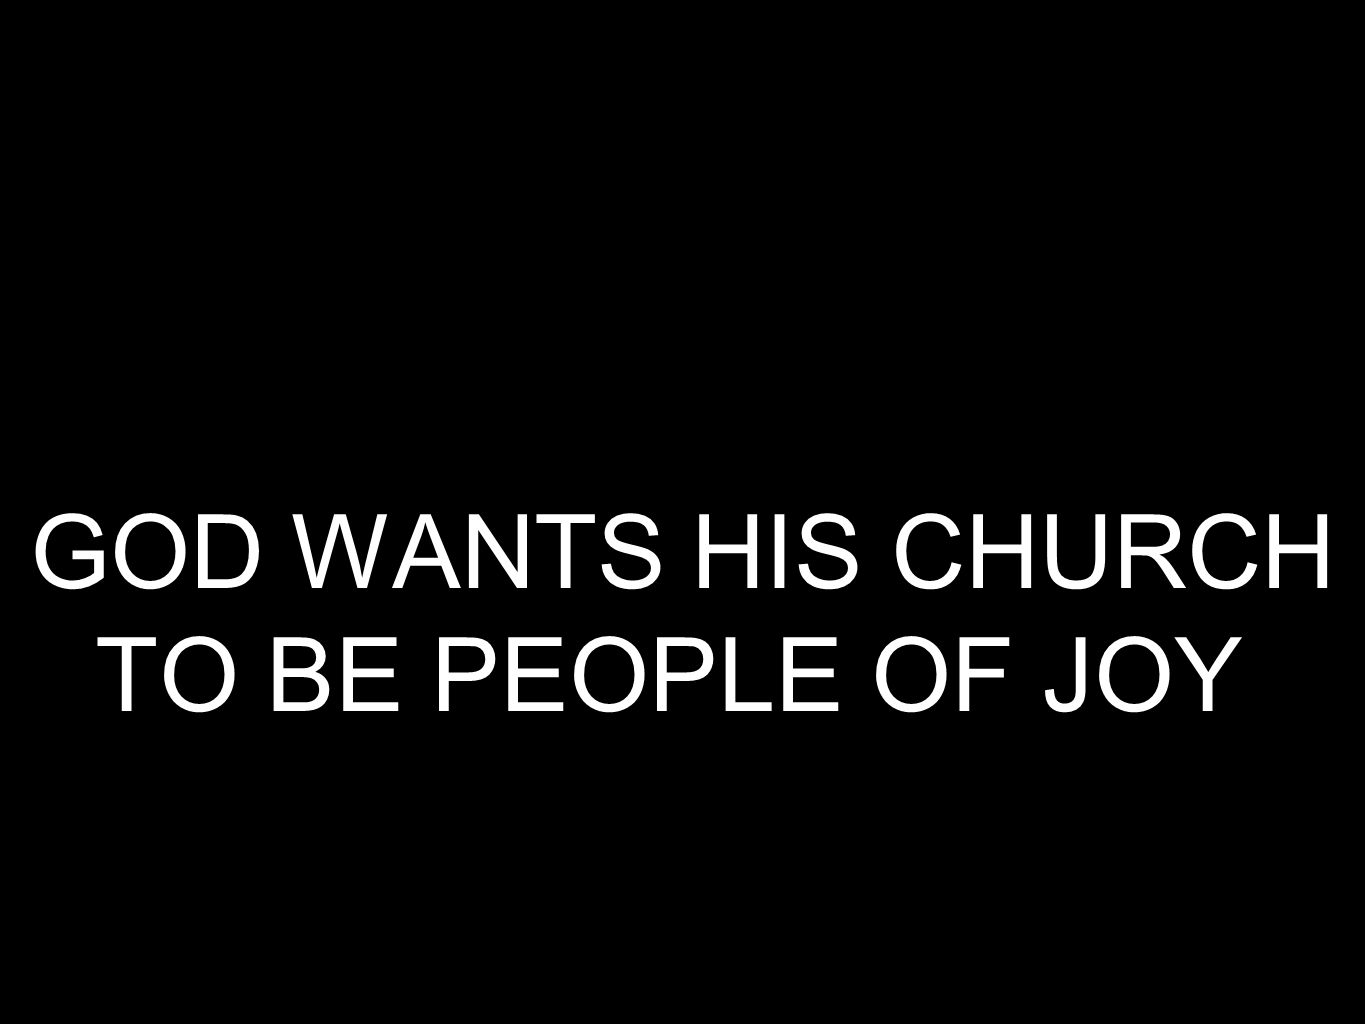 GOD WANTS HIS CHURCH TO BE PEOPLE OF JOY